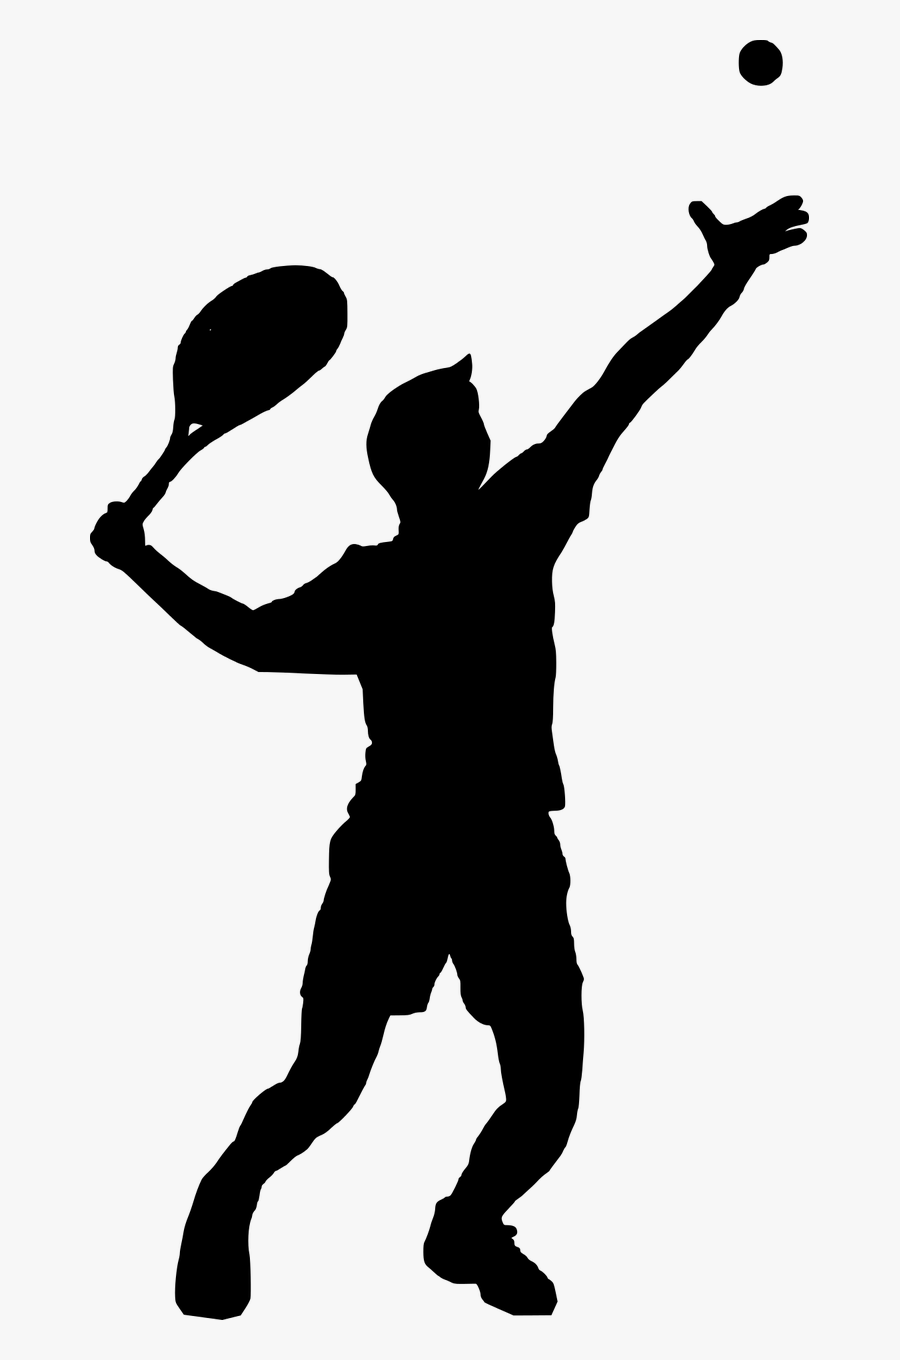 Transparent Sports Silhouette Png - Volleyball Player Clipart, Transparent Clipart